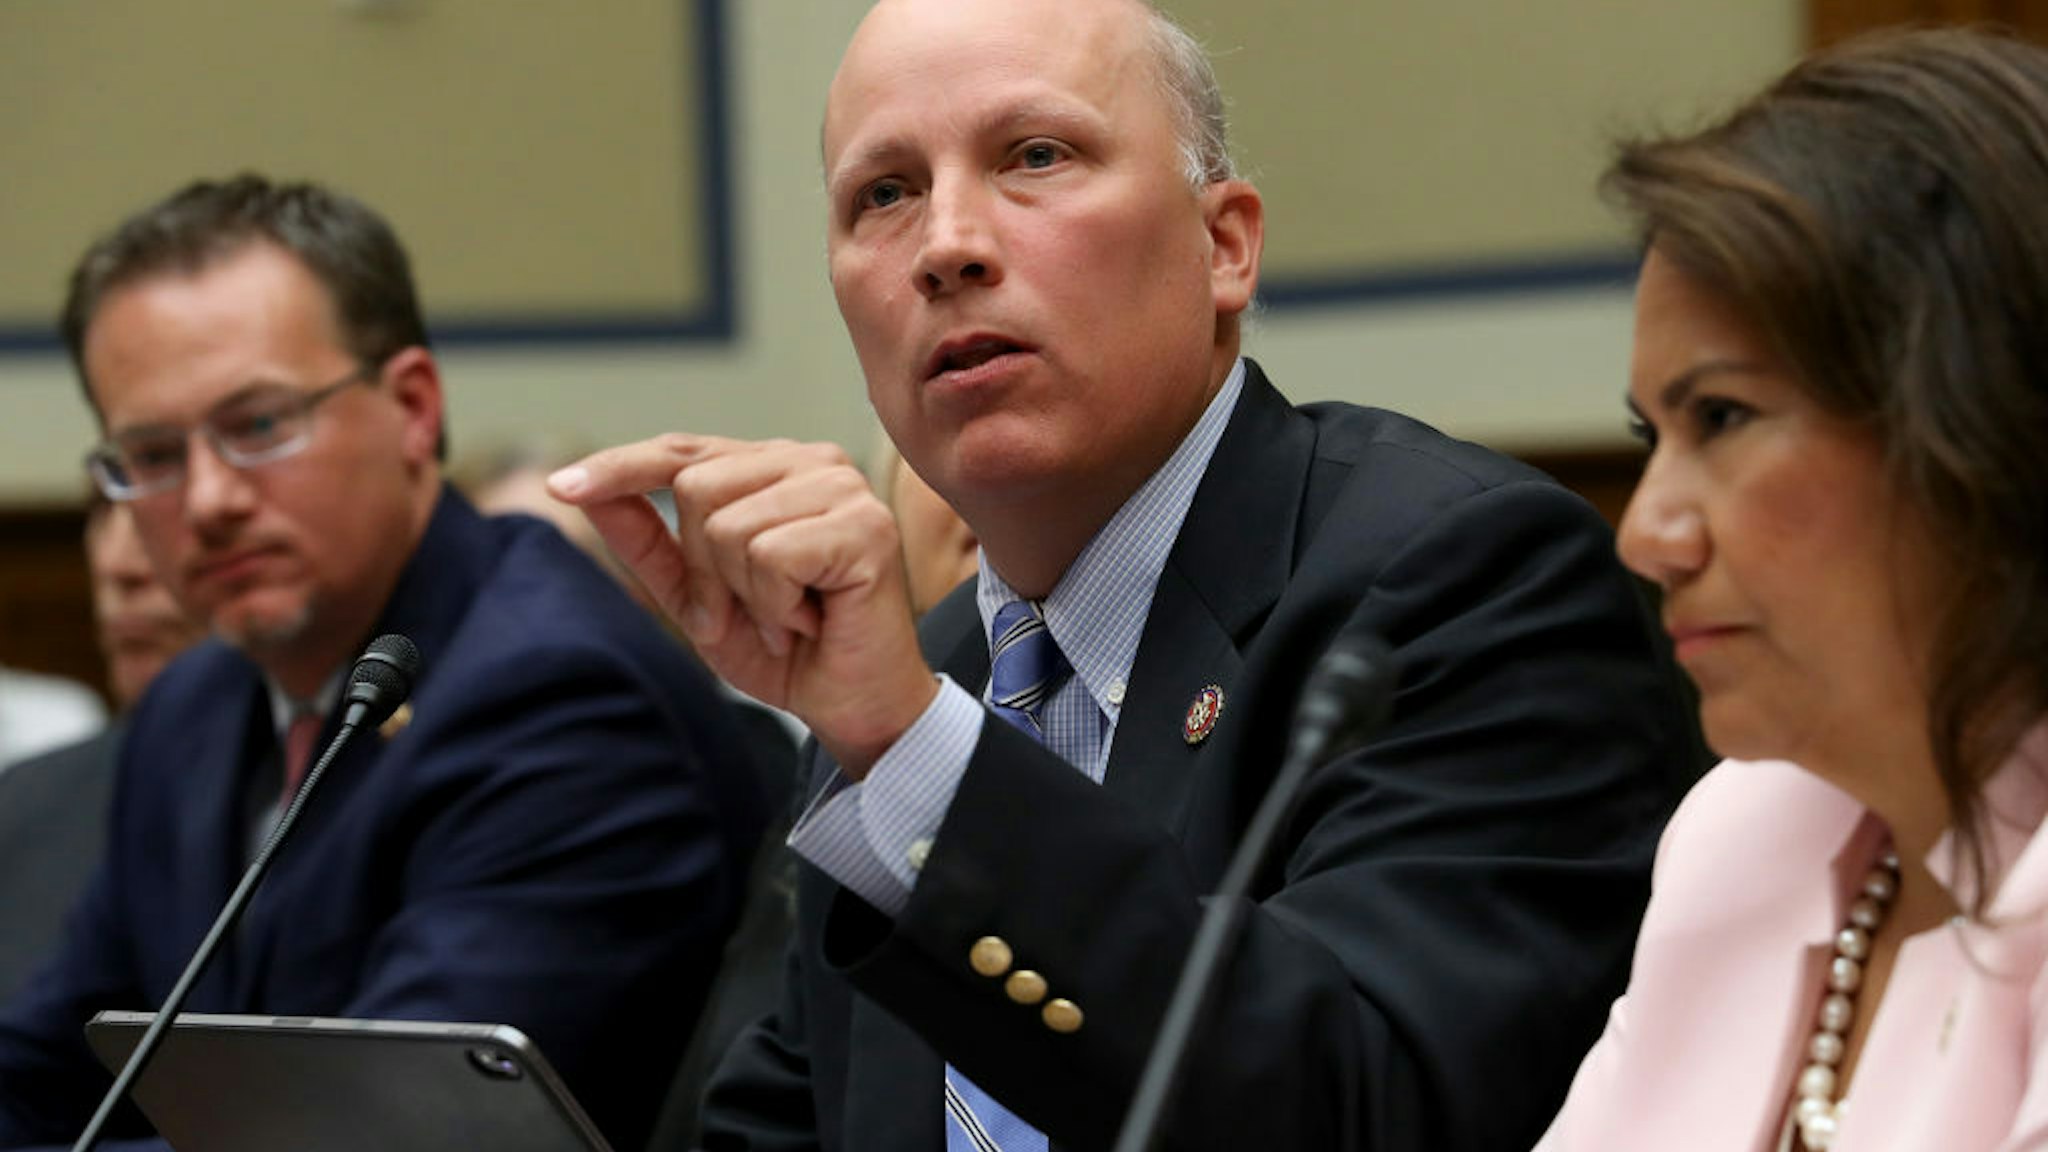 Chip Roy (R-TX) testifies before a House Oversight and Reform Committee hearing